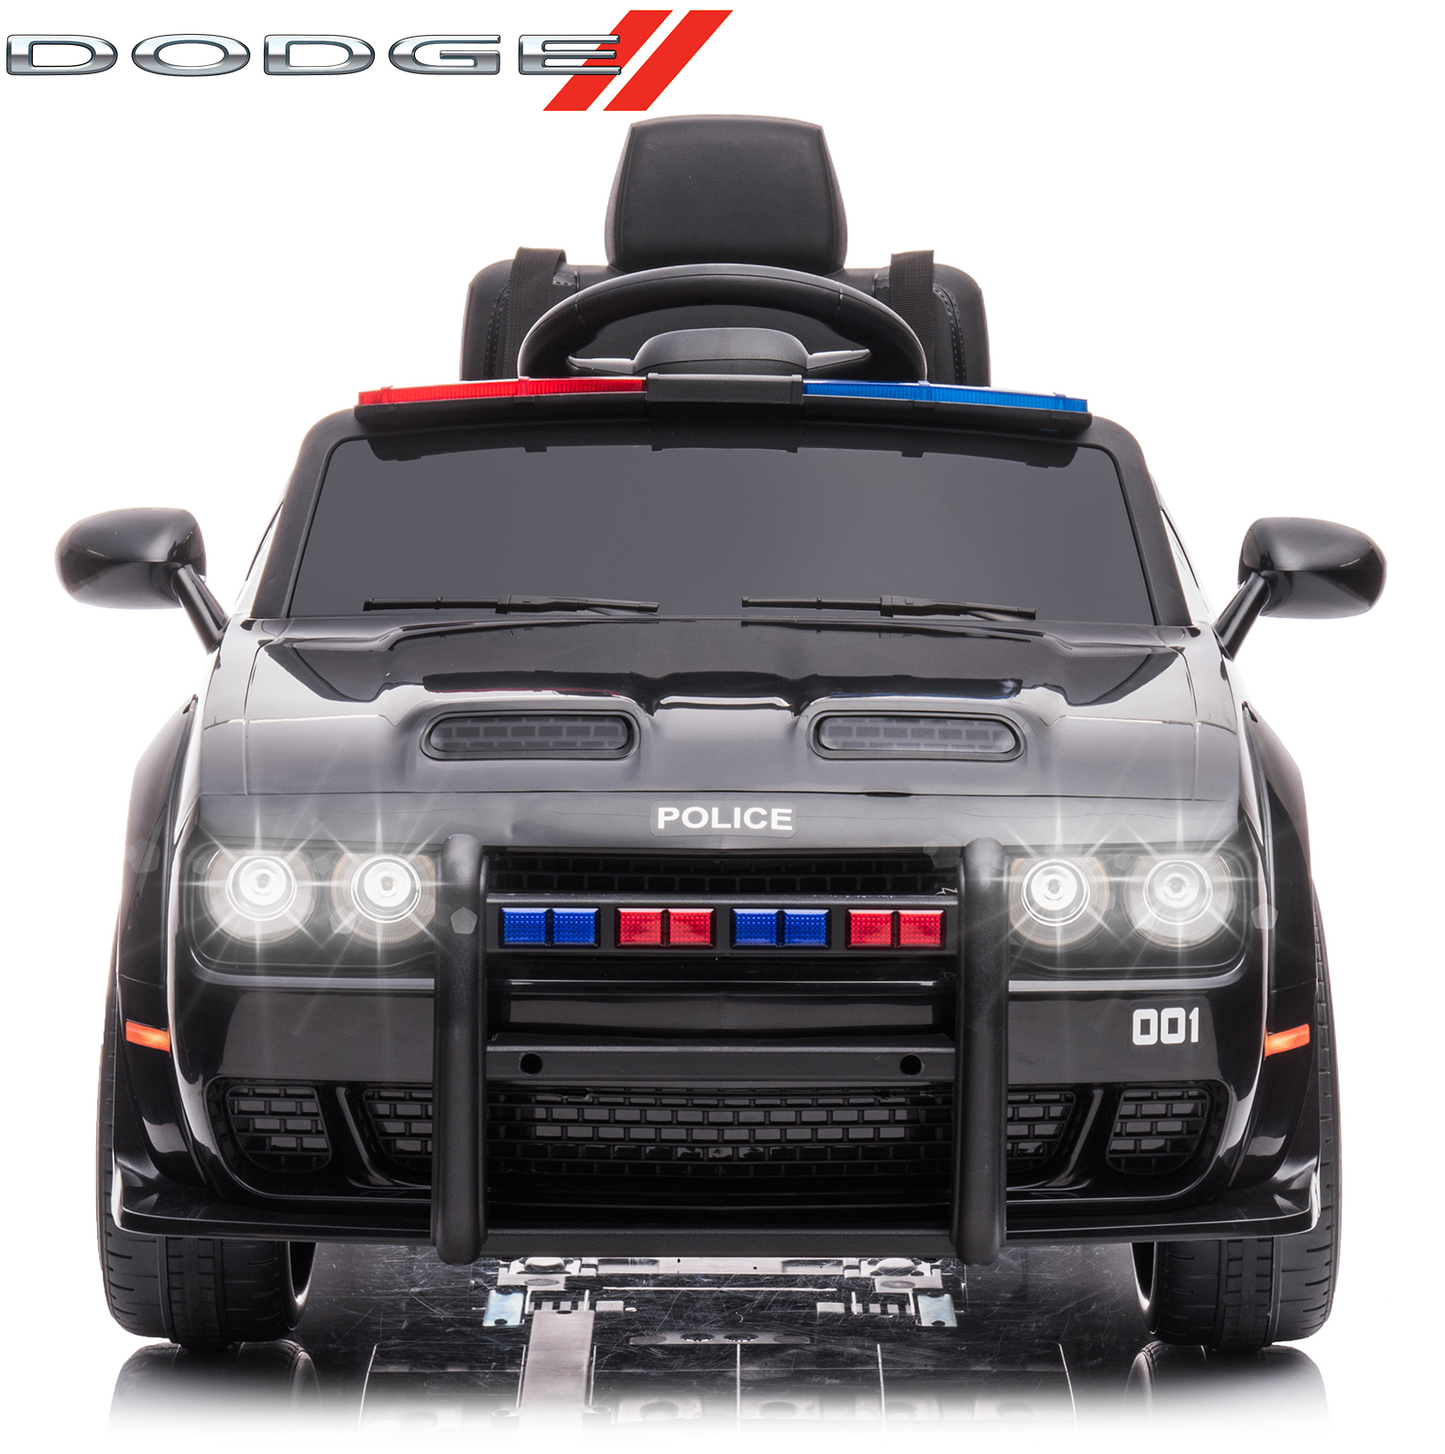 SYNGAR 12V Powered Ride on Police Car, Licensed Dodge Challenger Kids Ride On Toys with Patental Remote Control, LED Lights and Horn, Battery Operated Electric Vehicles Black, LJ1556